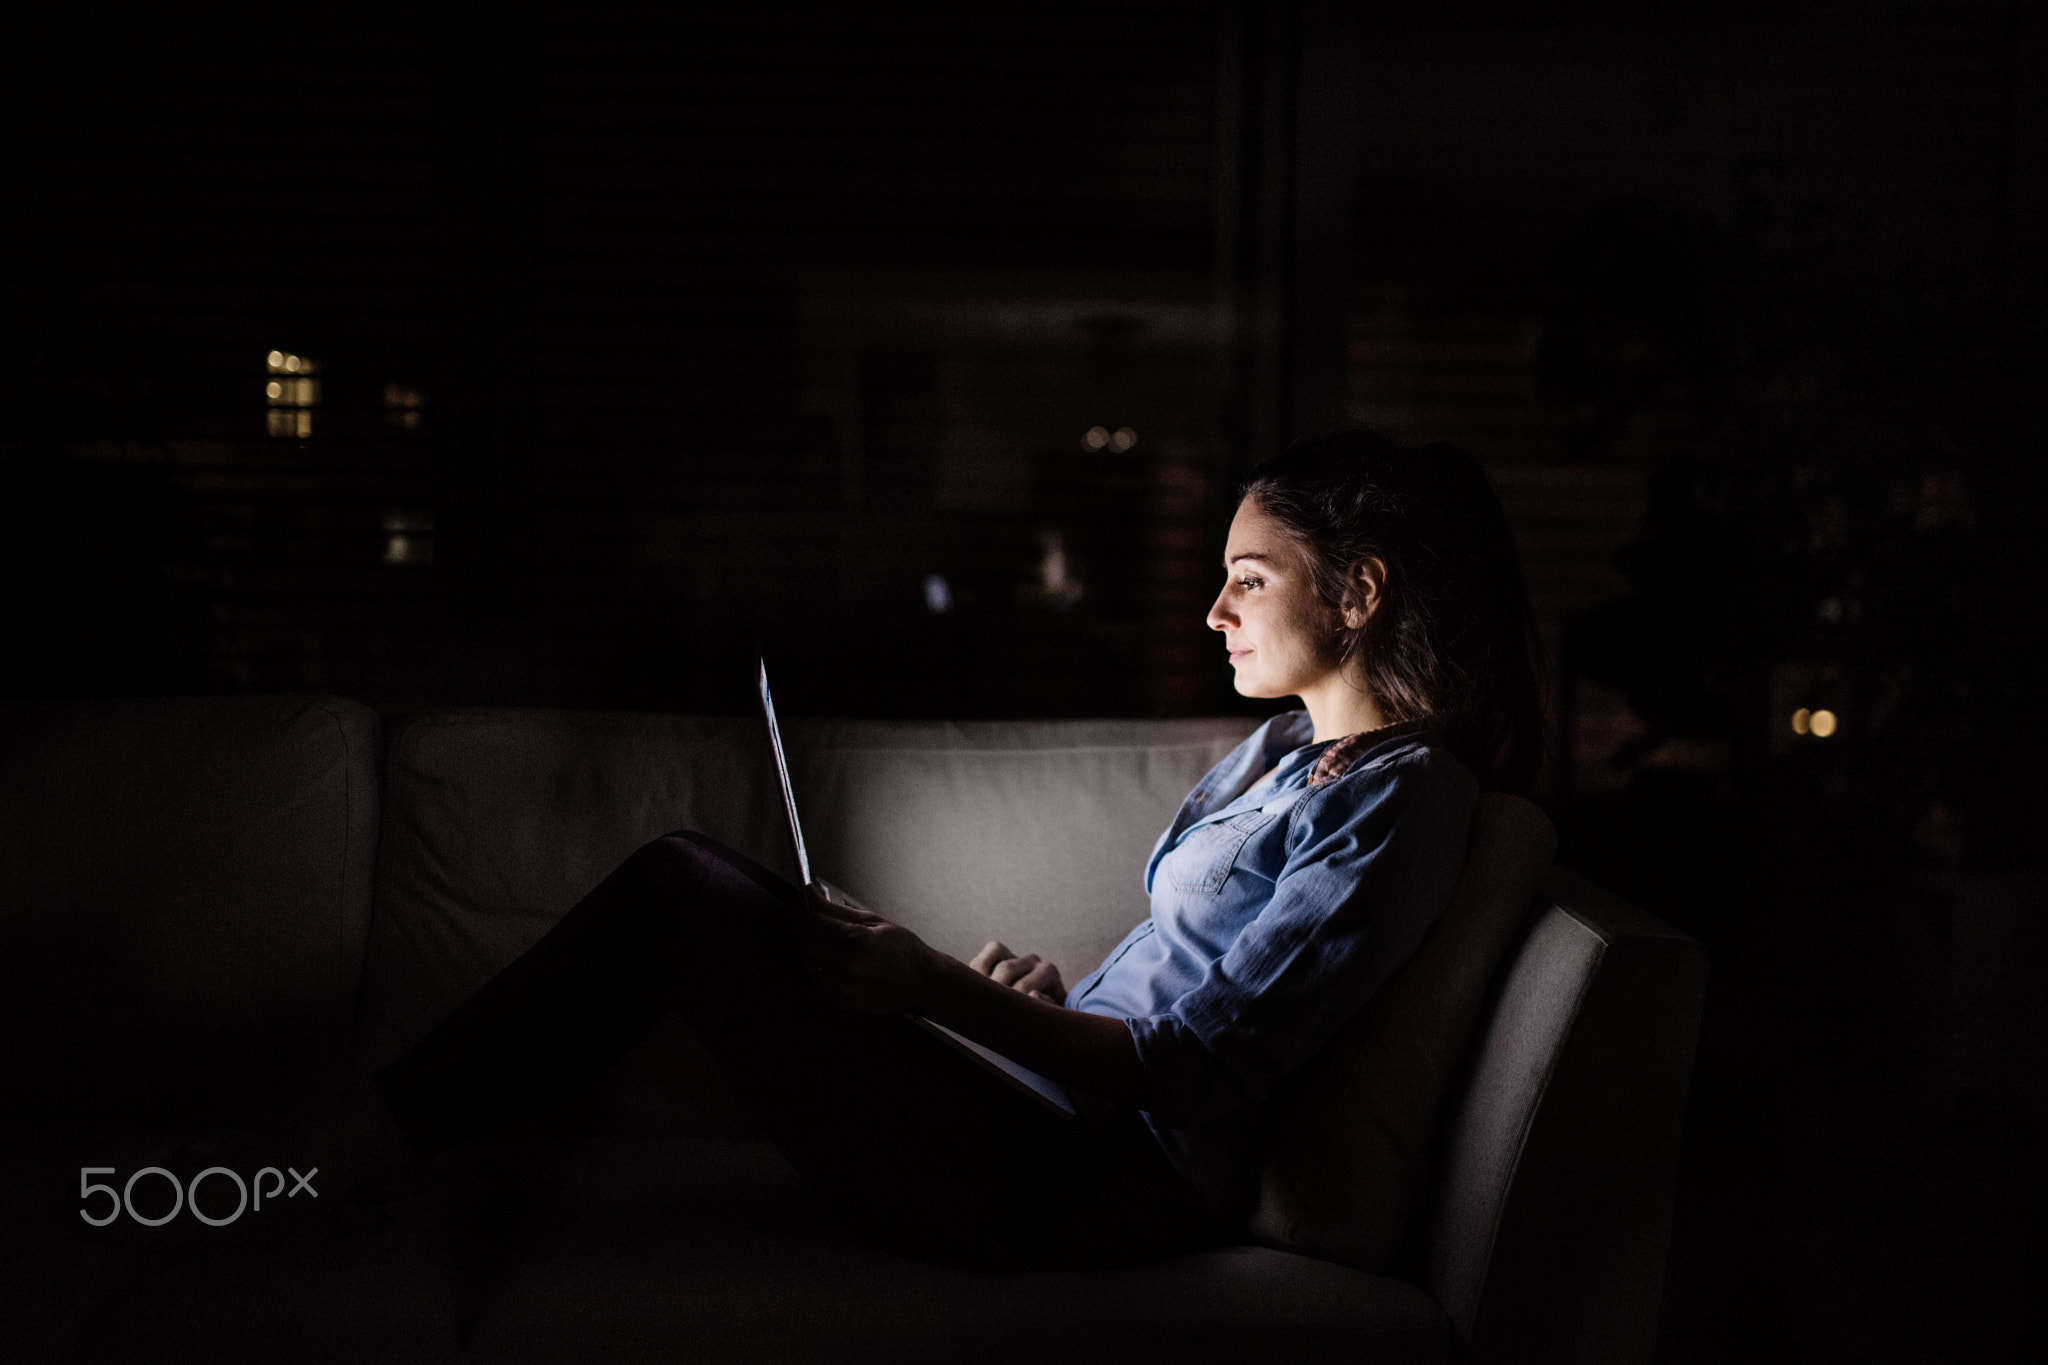 A woman working on a laptop at night at home.